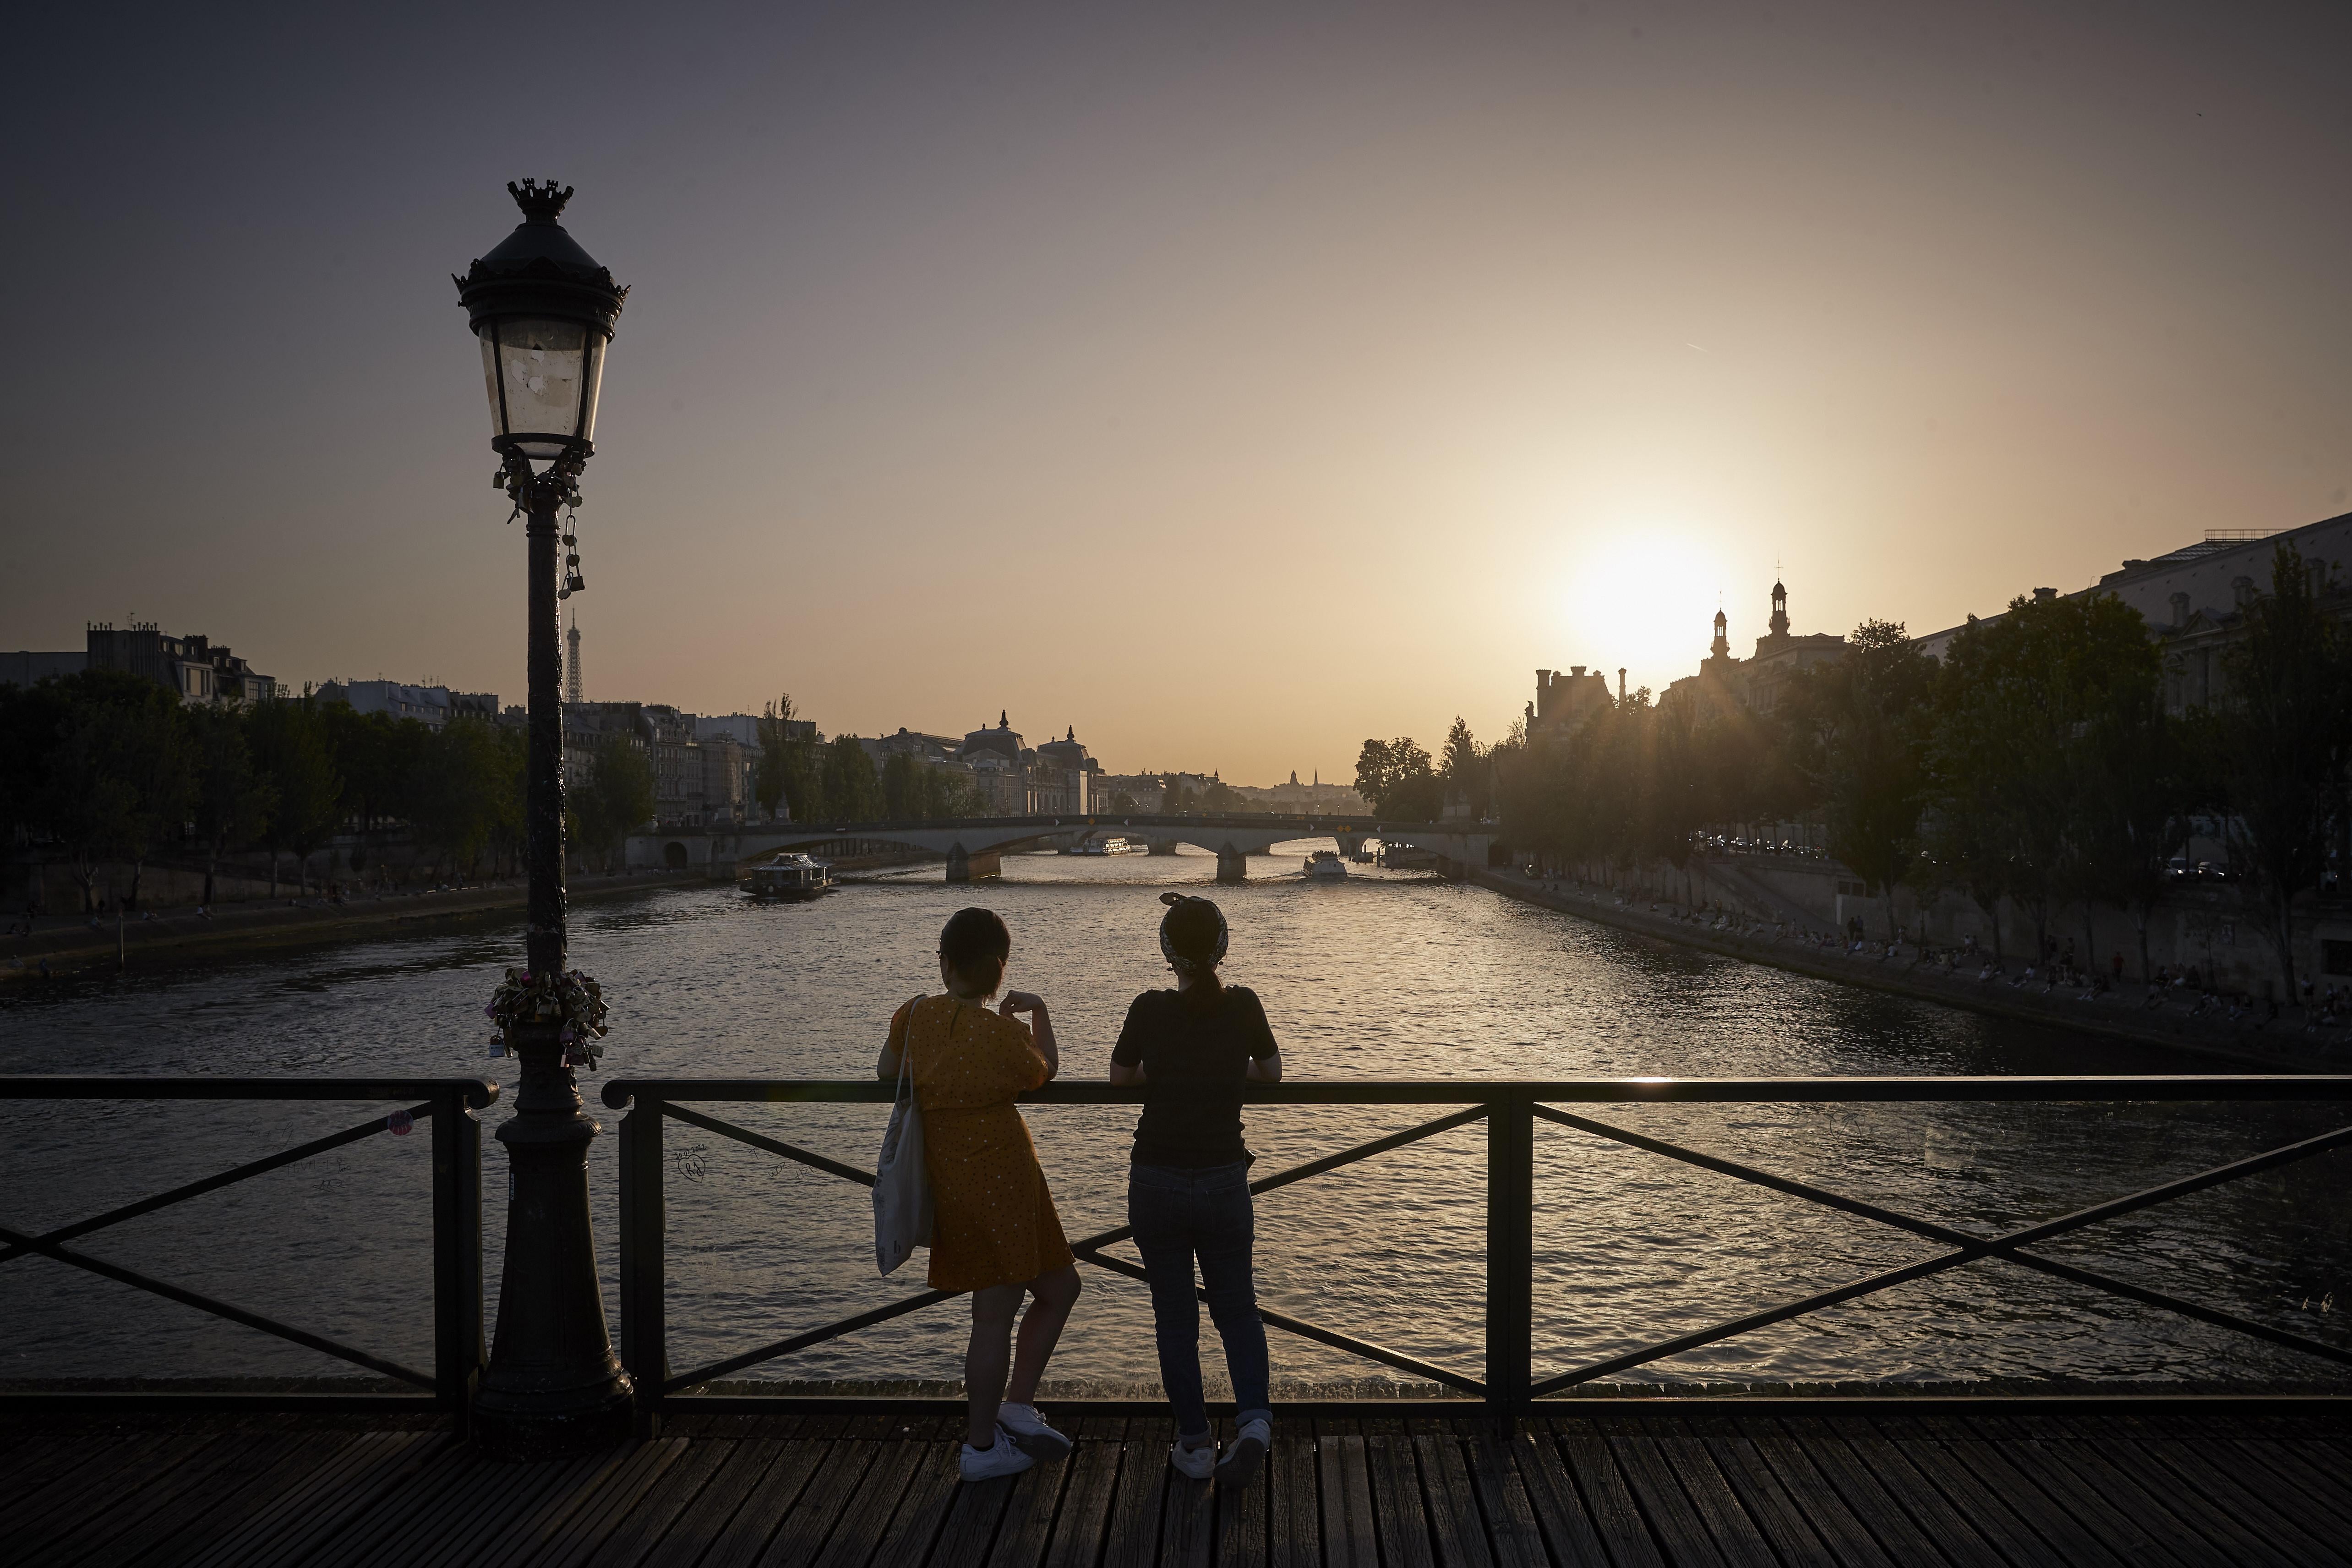 PARIS, FRANCE - JUNE 18: Parisians watch the sun set from Pont des Arts bridge after a day of soaring temperatures of close to 40°C in what is expected to be a new record for the hottest June day in the city on June 18, 2022 in Paris, France. Outdoor public events across France have been cancelled as countries across Europe face high temperatures caused by the mass of hot air moving from north Africa, causing health risks as well as wild fires and energy shortages.